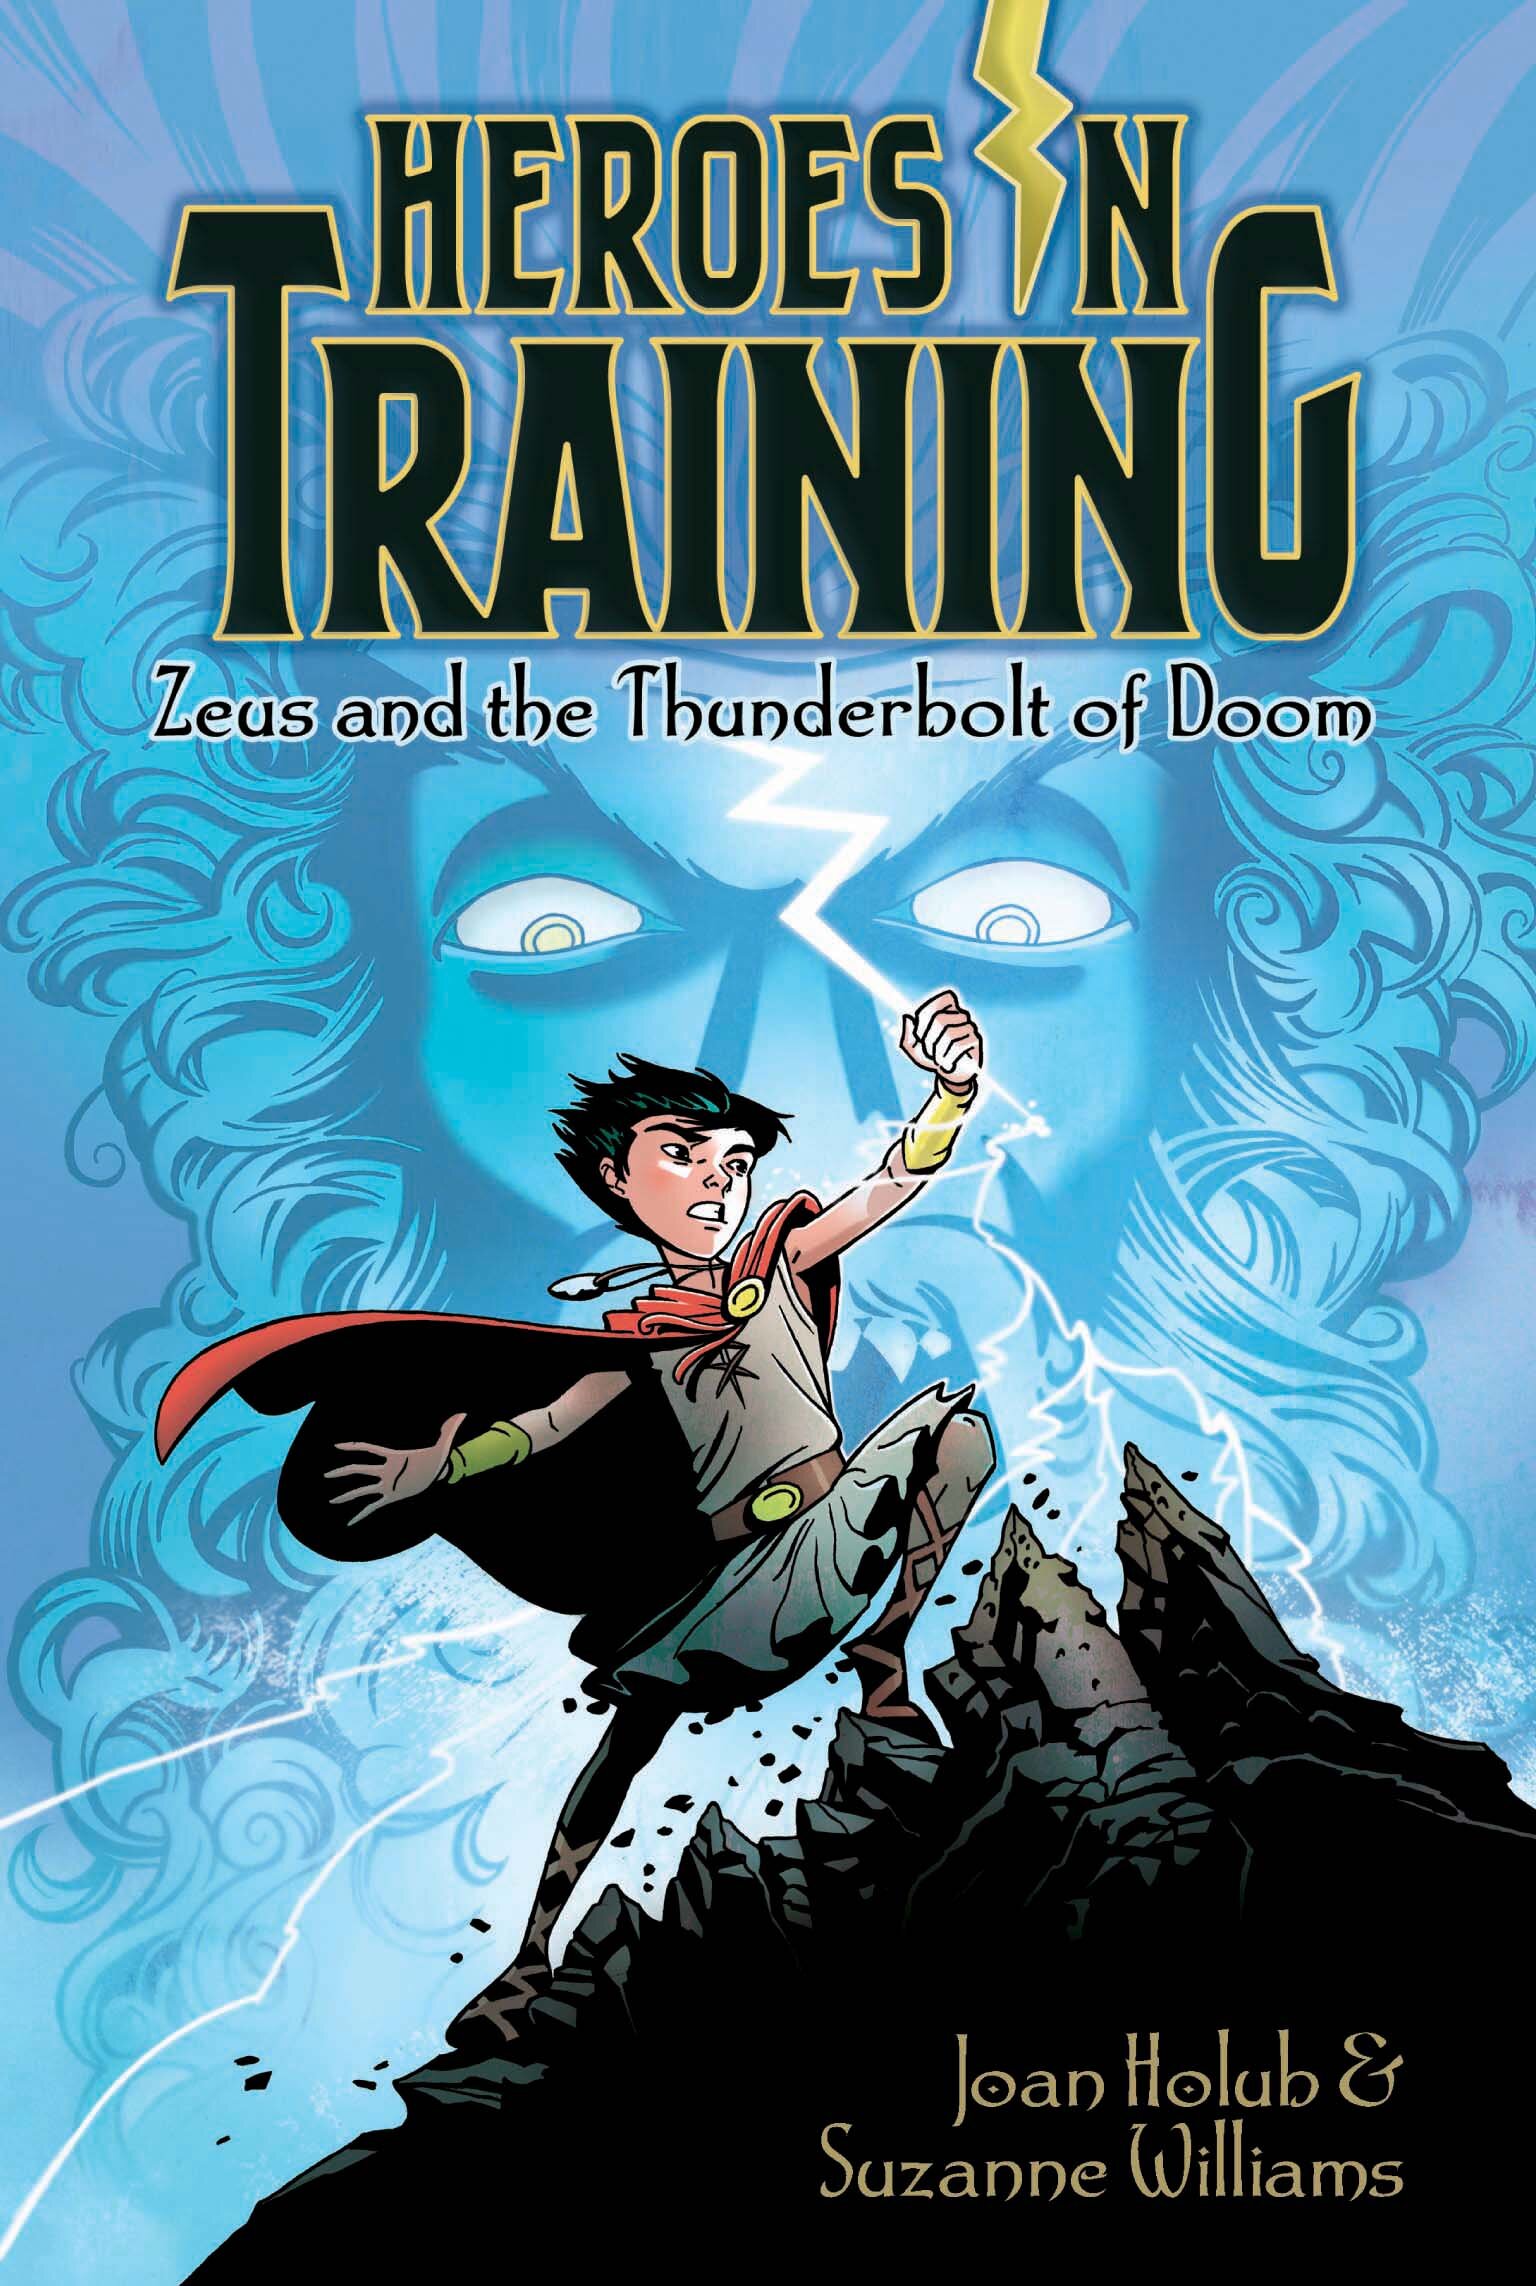 Heroes In Training book series (ages 6-10)